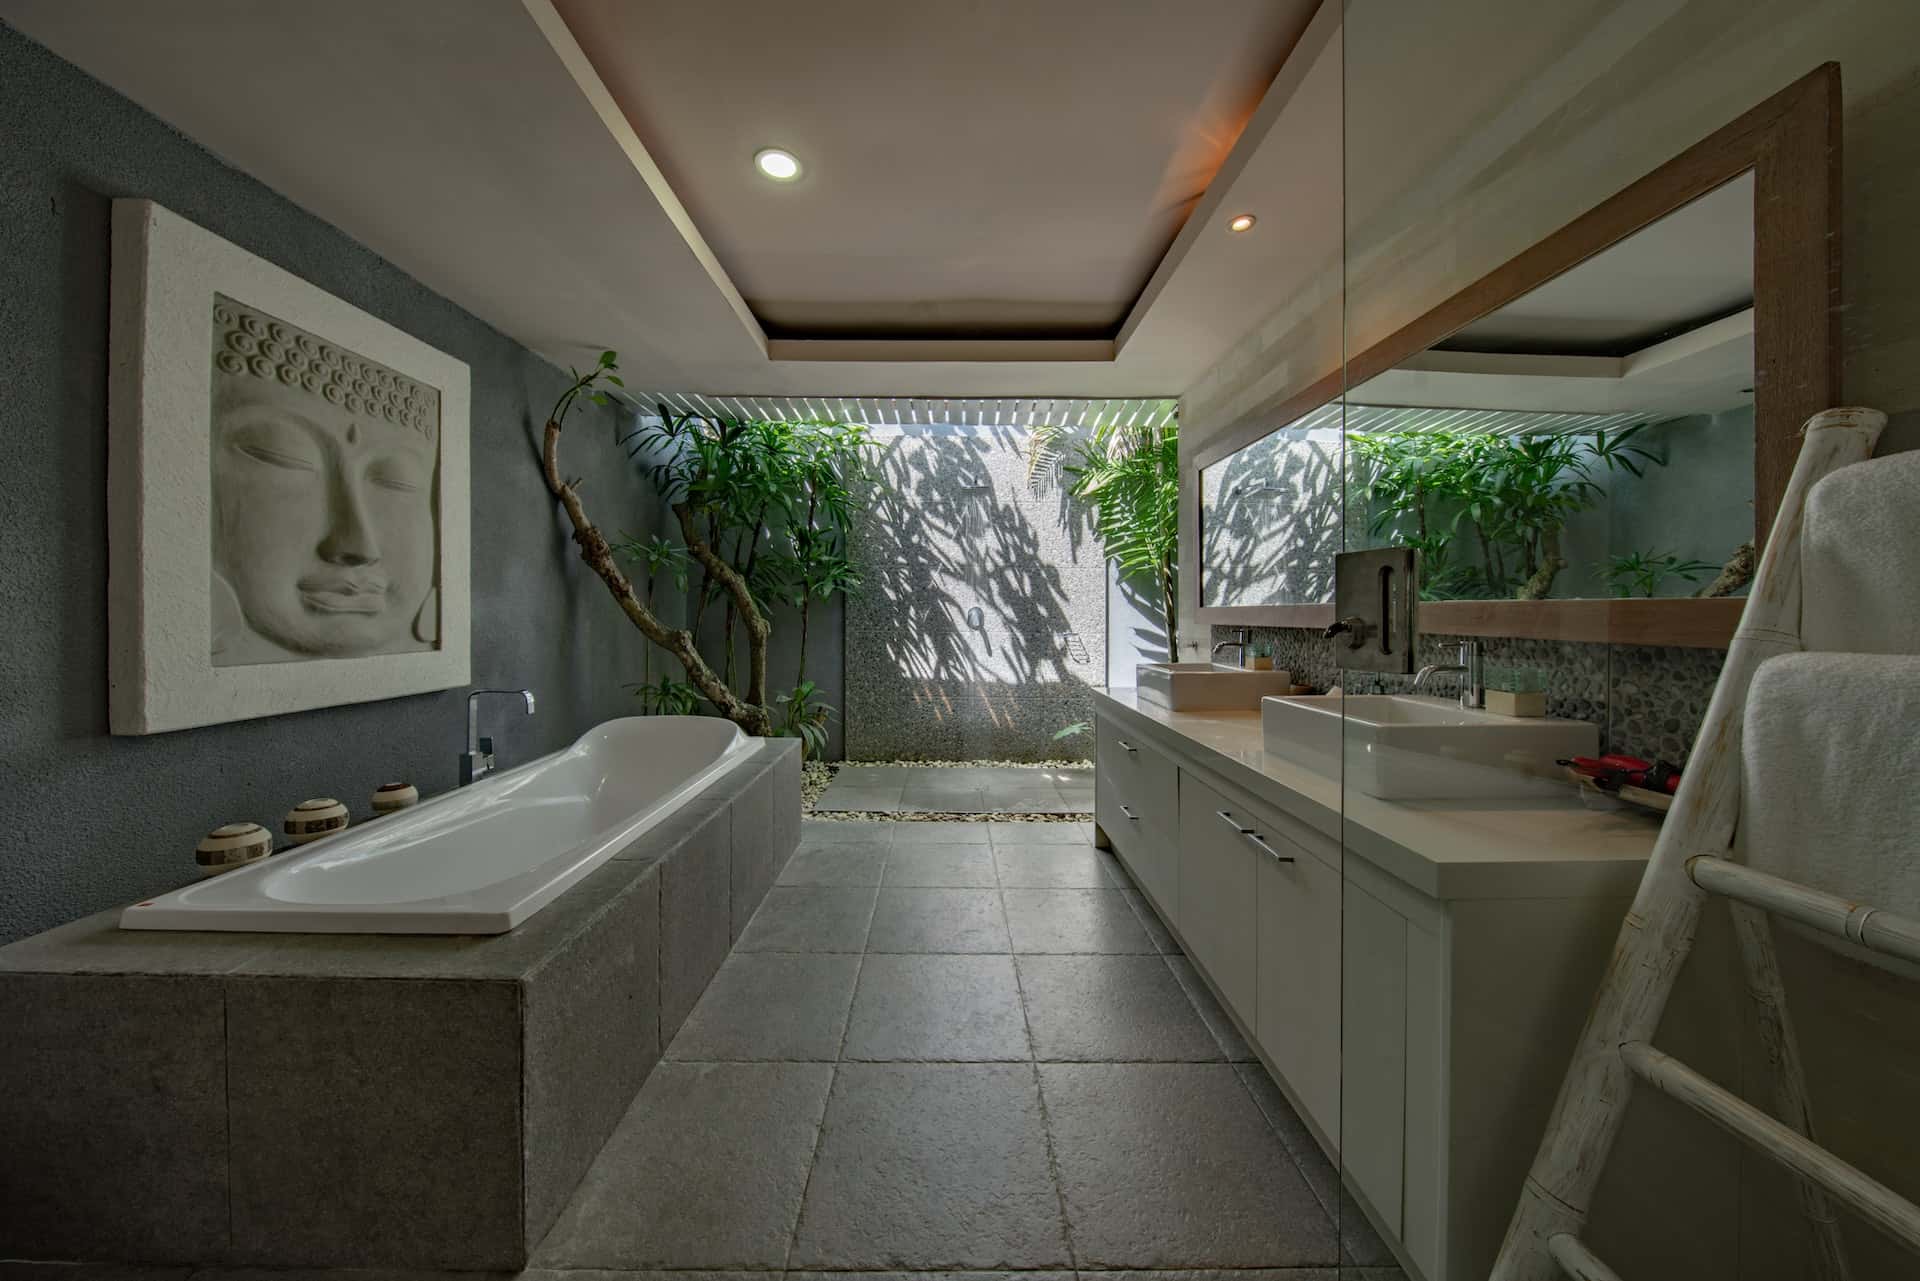 luxurious setting in the open bathroom